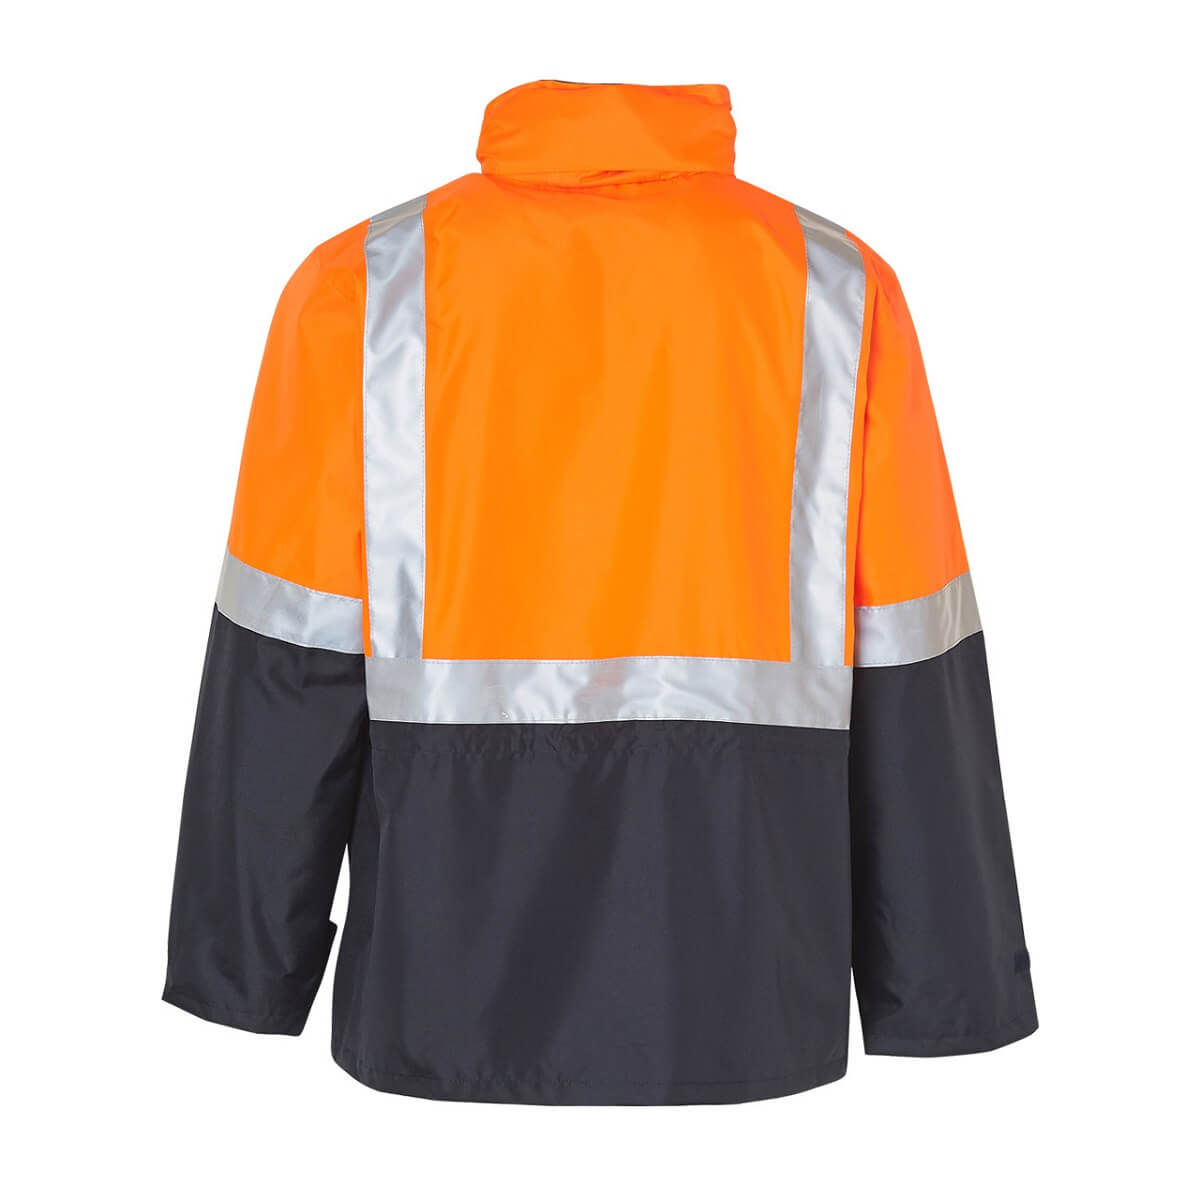 SW18A Hi Vis Safety Jacket With Mesh Lining